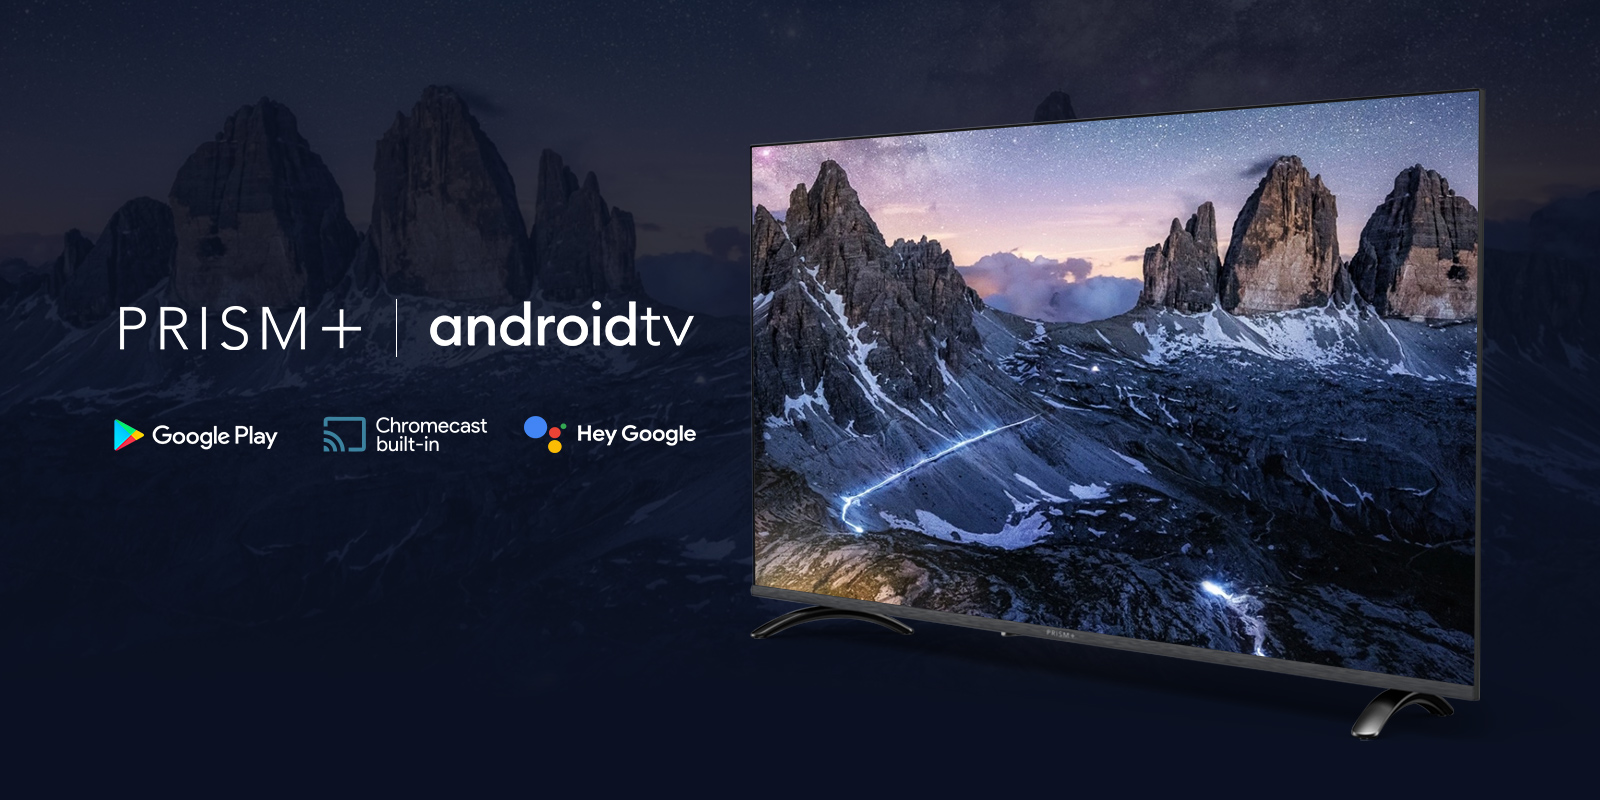 PRISM+ launched affordable 4K Android TVs